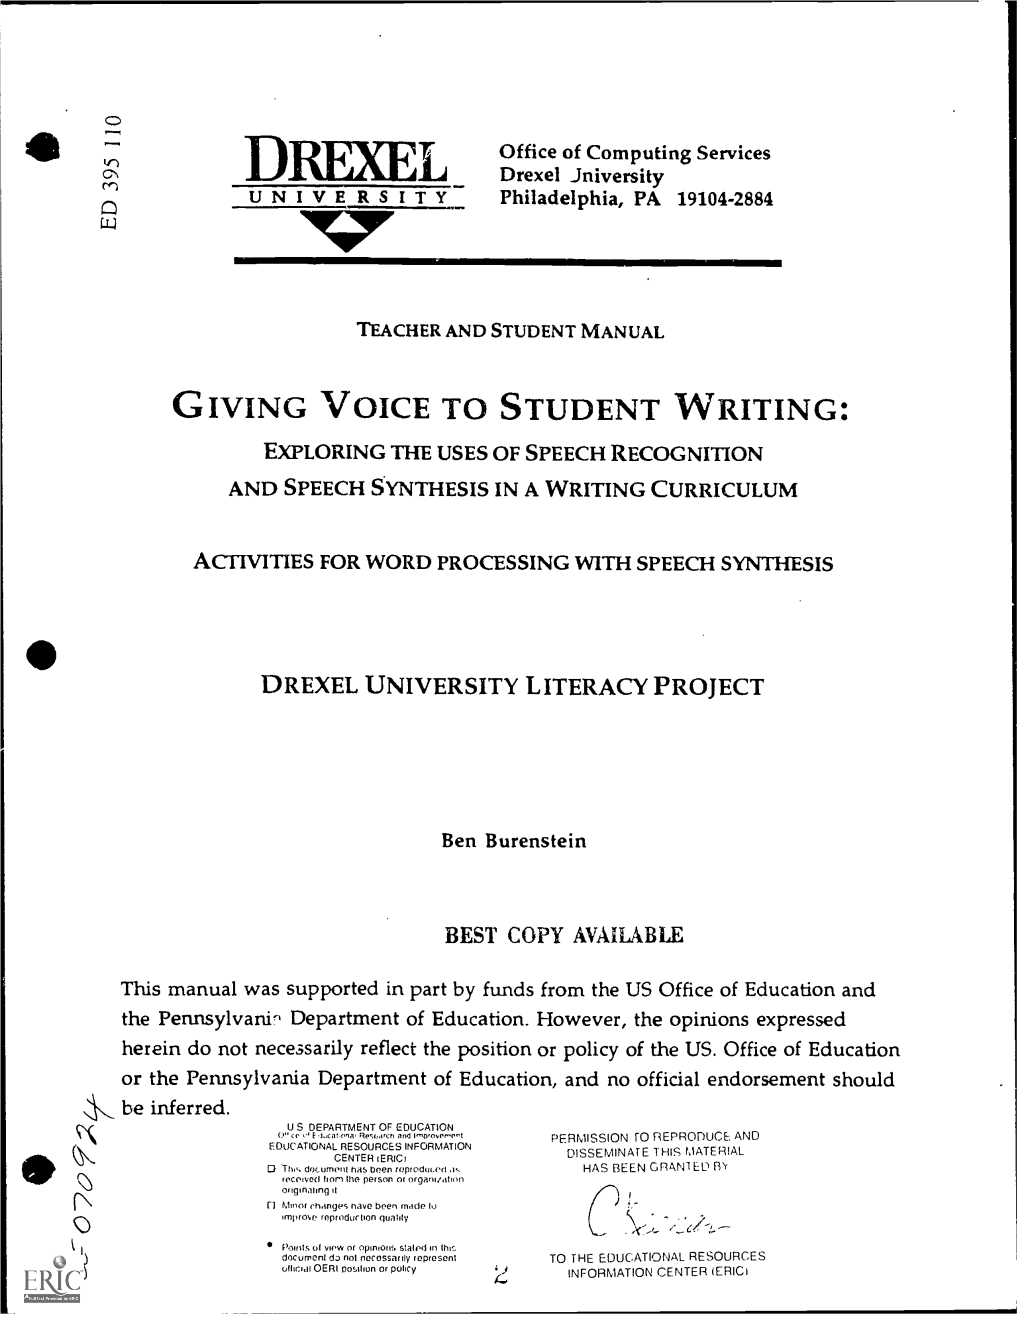 Giving Voice to Student Writing: Exploring the Uses of Speech Recognition and Speech Synthesis in a Writing Curriculum